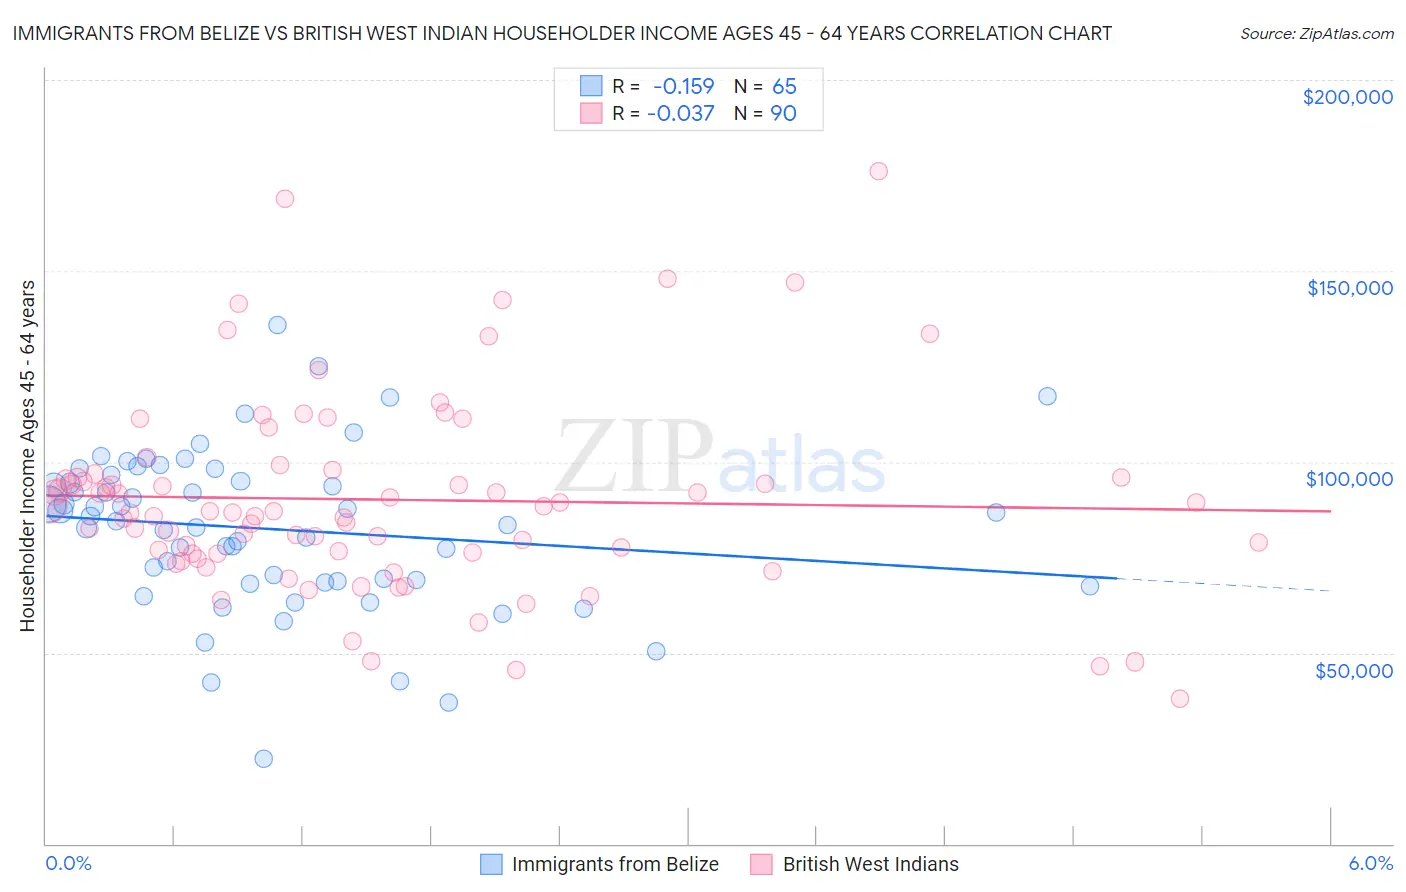 Immigrants from Belize vs British West Indian Householder Income Ages 45 - 64 years